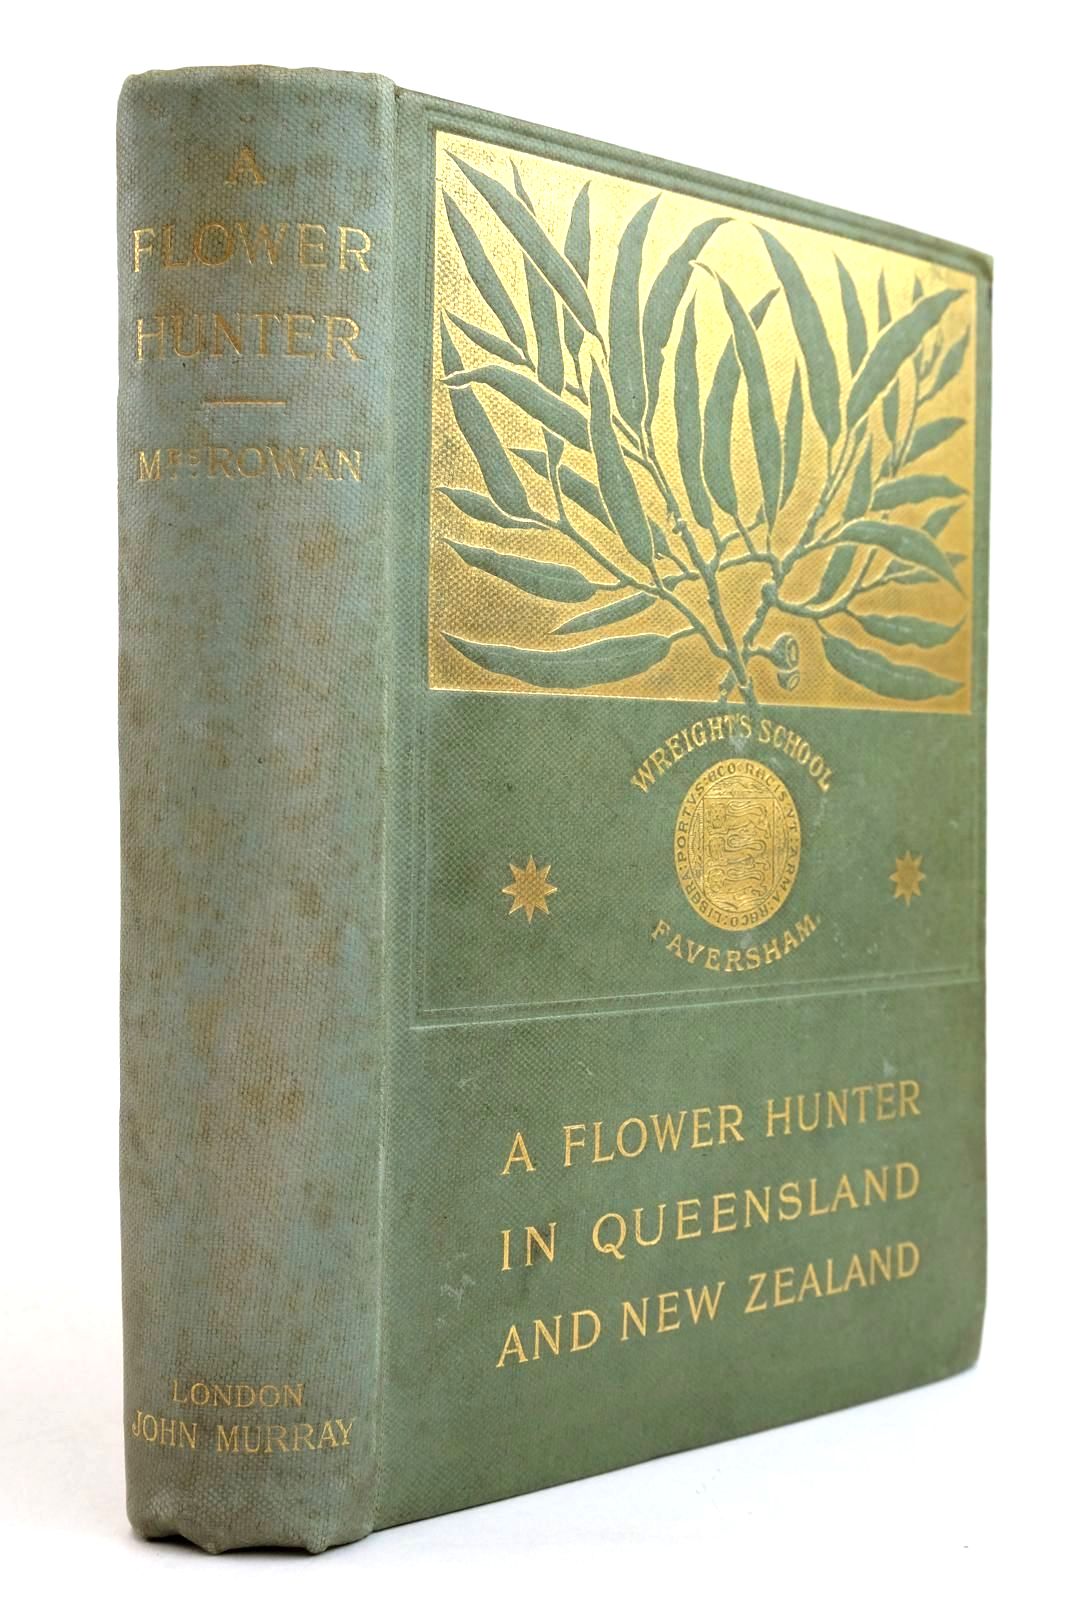 Photo of A FLOWER-HUNTER IN QUEENSLAND & NEW ZEALAND written by Rowan, Mrs. published by John Murray (STOCK CODE: 2134444)  for sale by Stella & Rose's Books